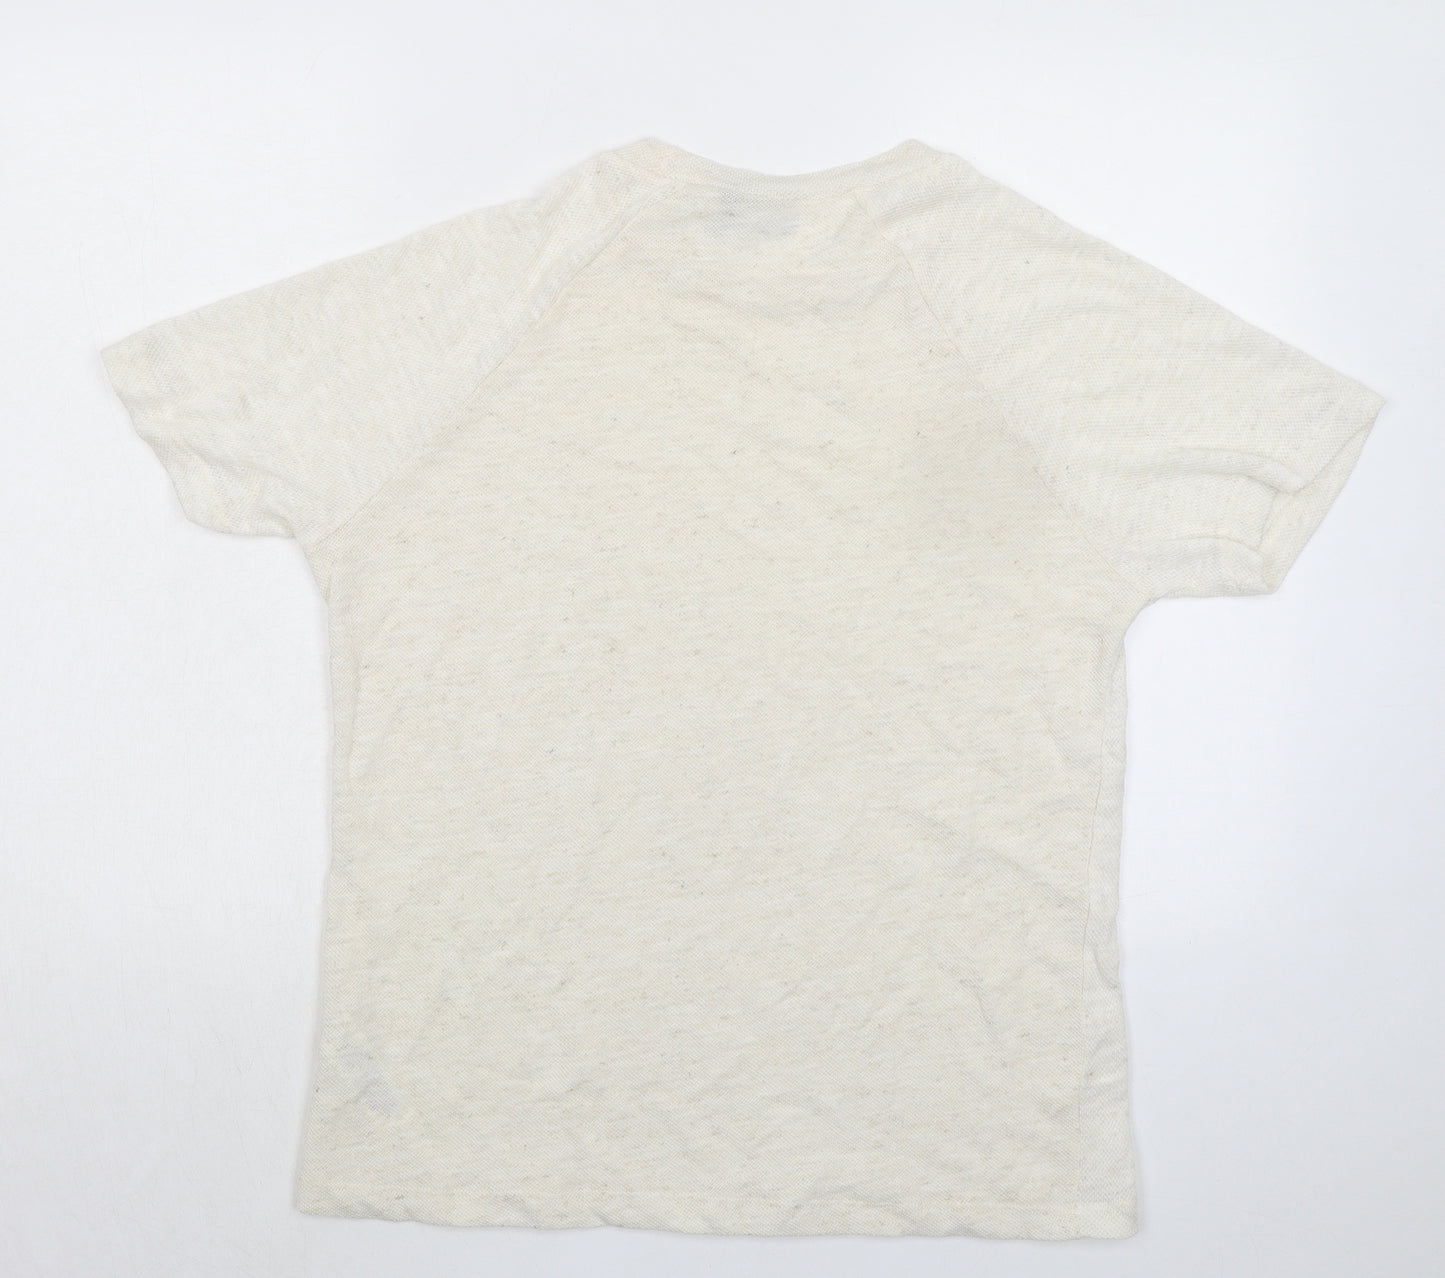 ASOS Mens Ivory Polyester T-Shirt Size S Crew Neck